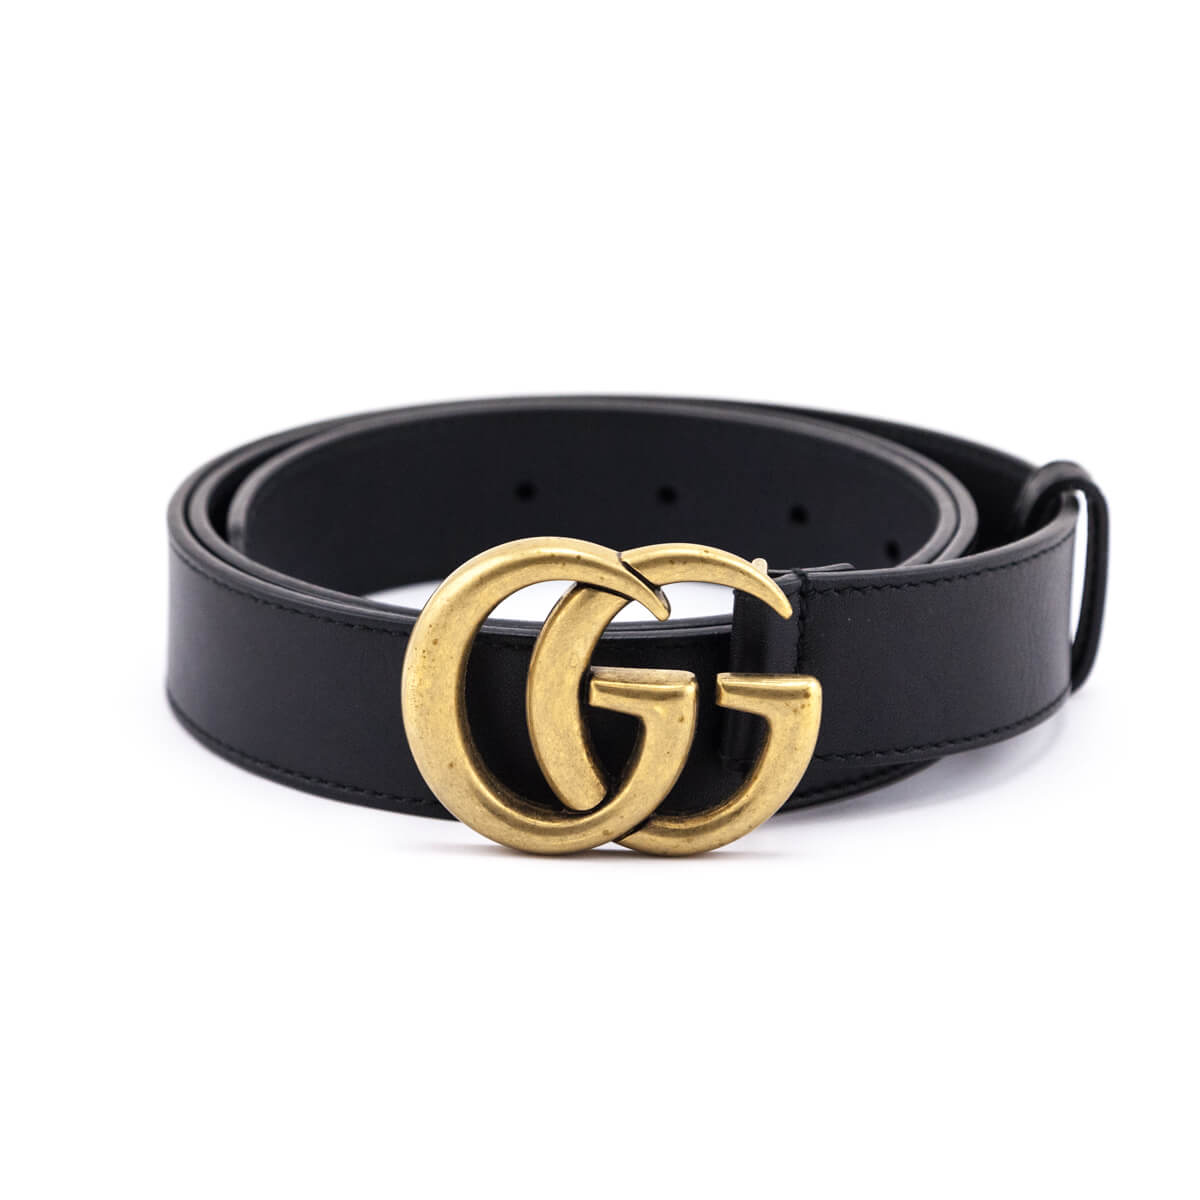 Gucci Black Leather Double G Belt Size XXL - Love that Bag etc - Preowned Authentic Designer Handbags & Preloved Fashions